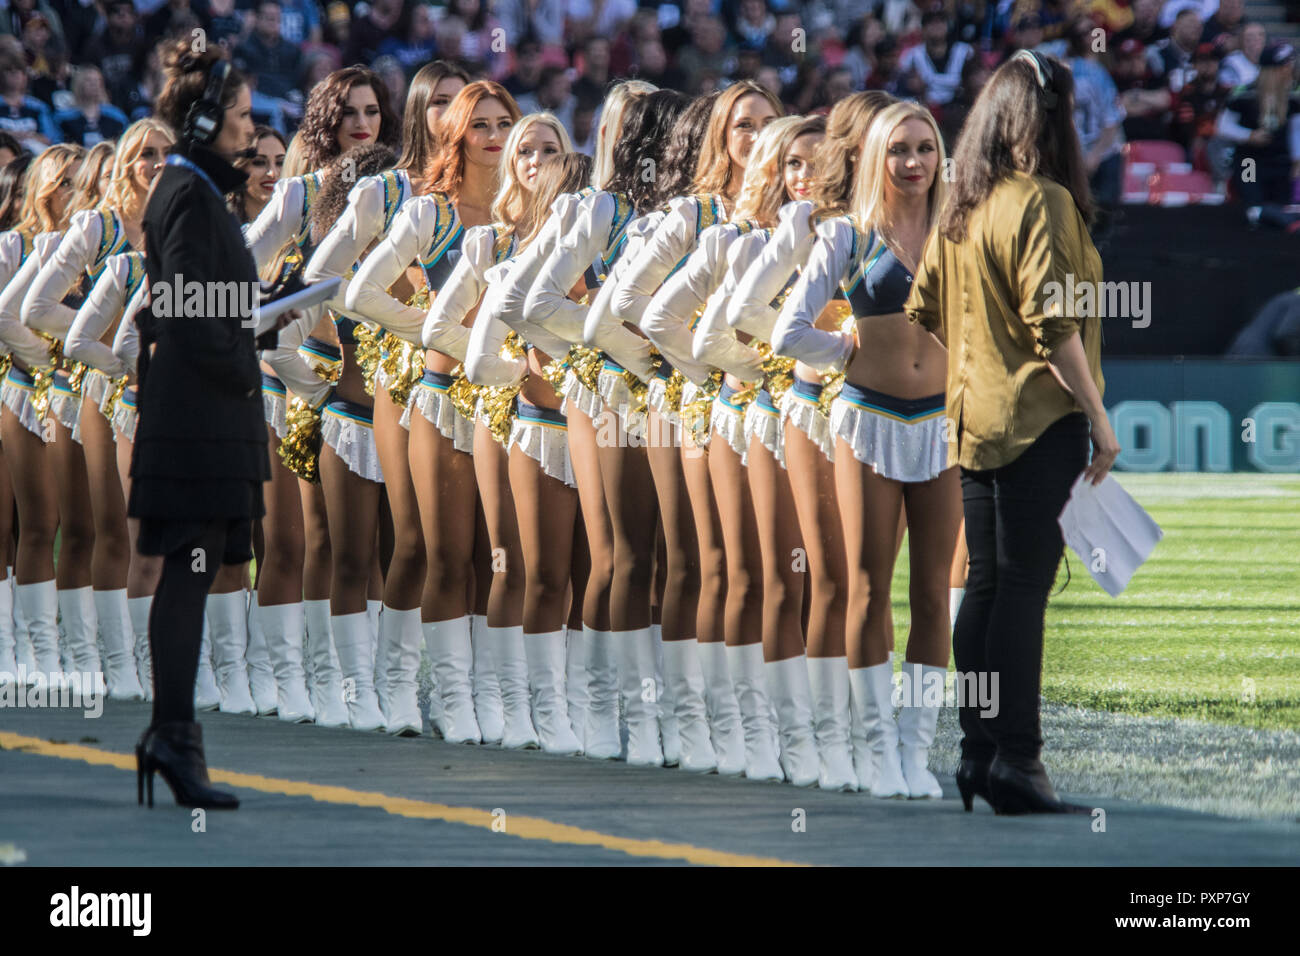 21st October 2018 LONDON, ENG - NFL: OCT 21 International Series - Titans at Chargers Atmosphere - Credit Glamourstock21st October 2018 LONDON, ENG - NFL: OCT 21 International Series - Titans at Chargers Atmosphere - Credit Glamourstock21st October 2018 LONDON, ENG - NFL: OCT 21 International Series - Titans at Chargers Cheerleaders - Credit Glamourstock Stock Photo